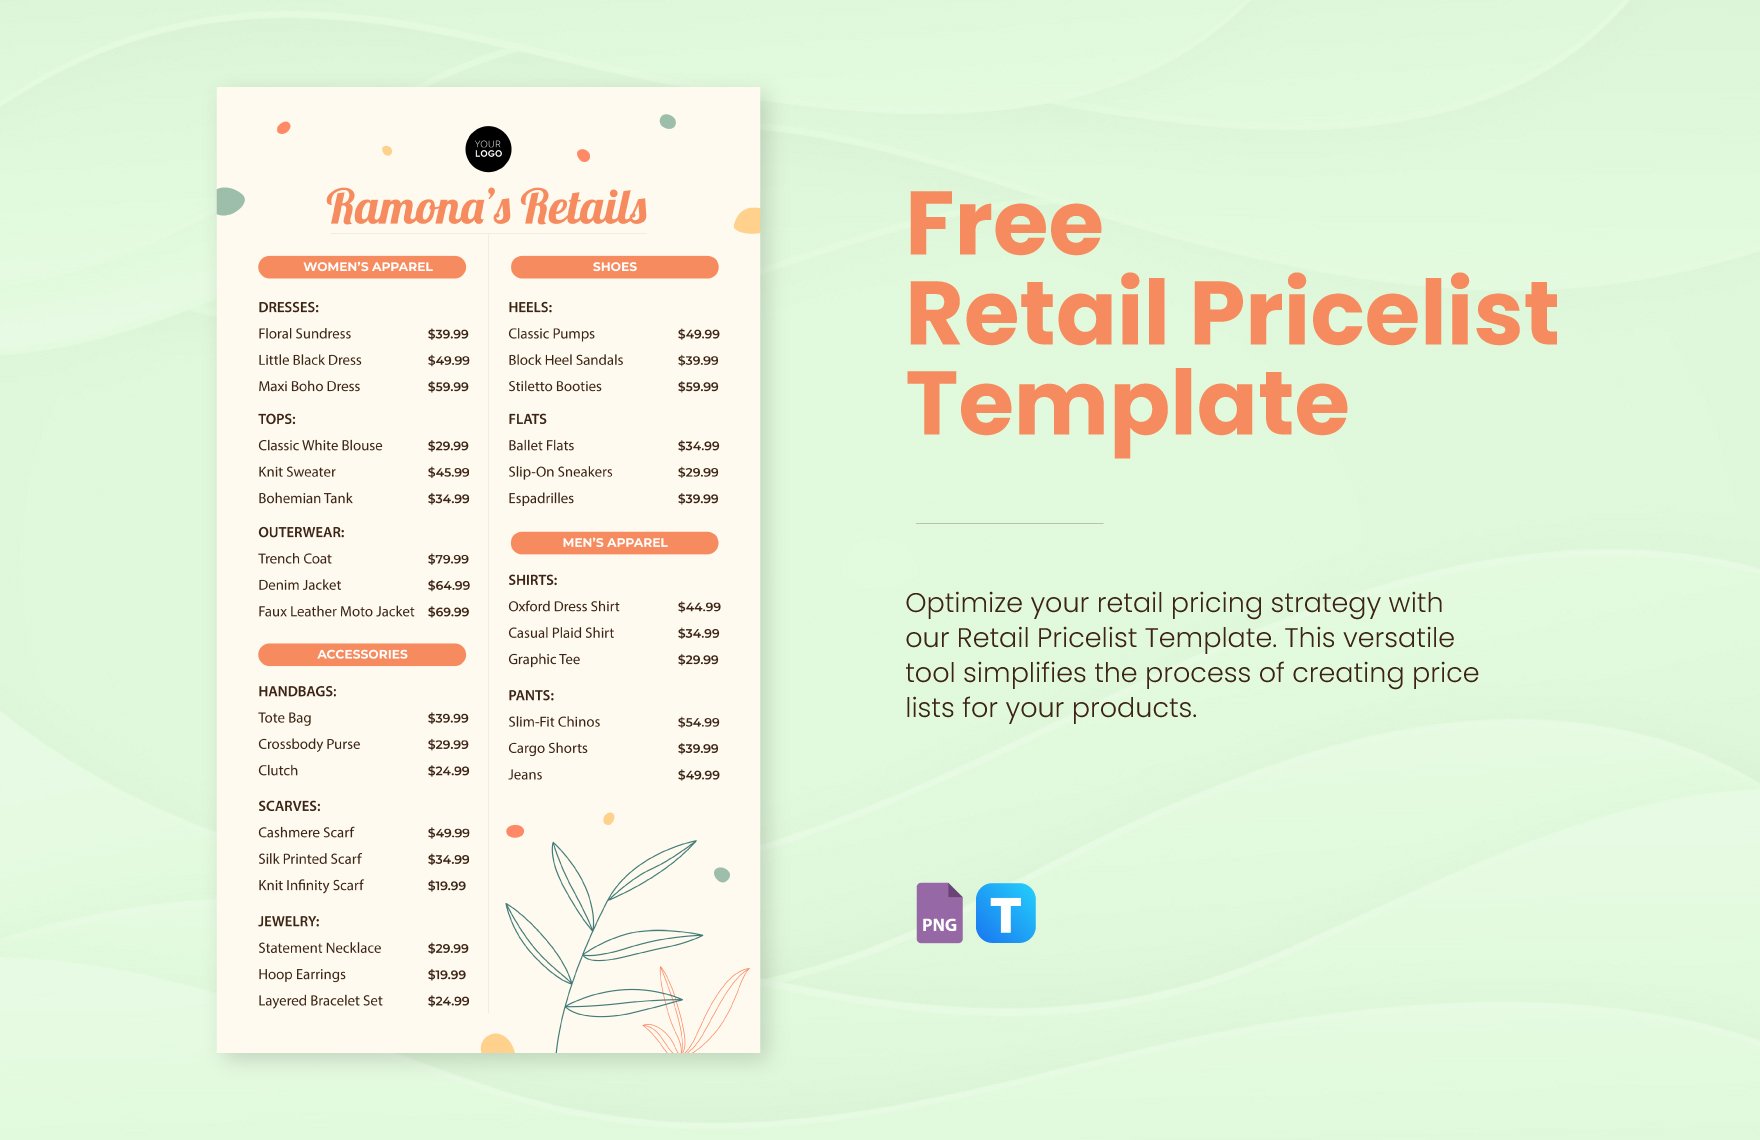 Free Retail Pricelist Template in PNG